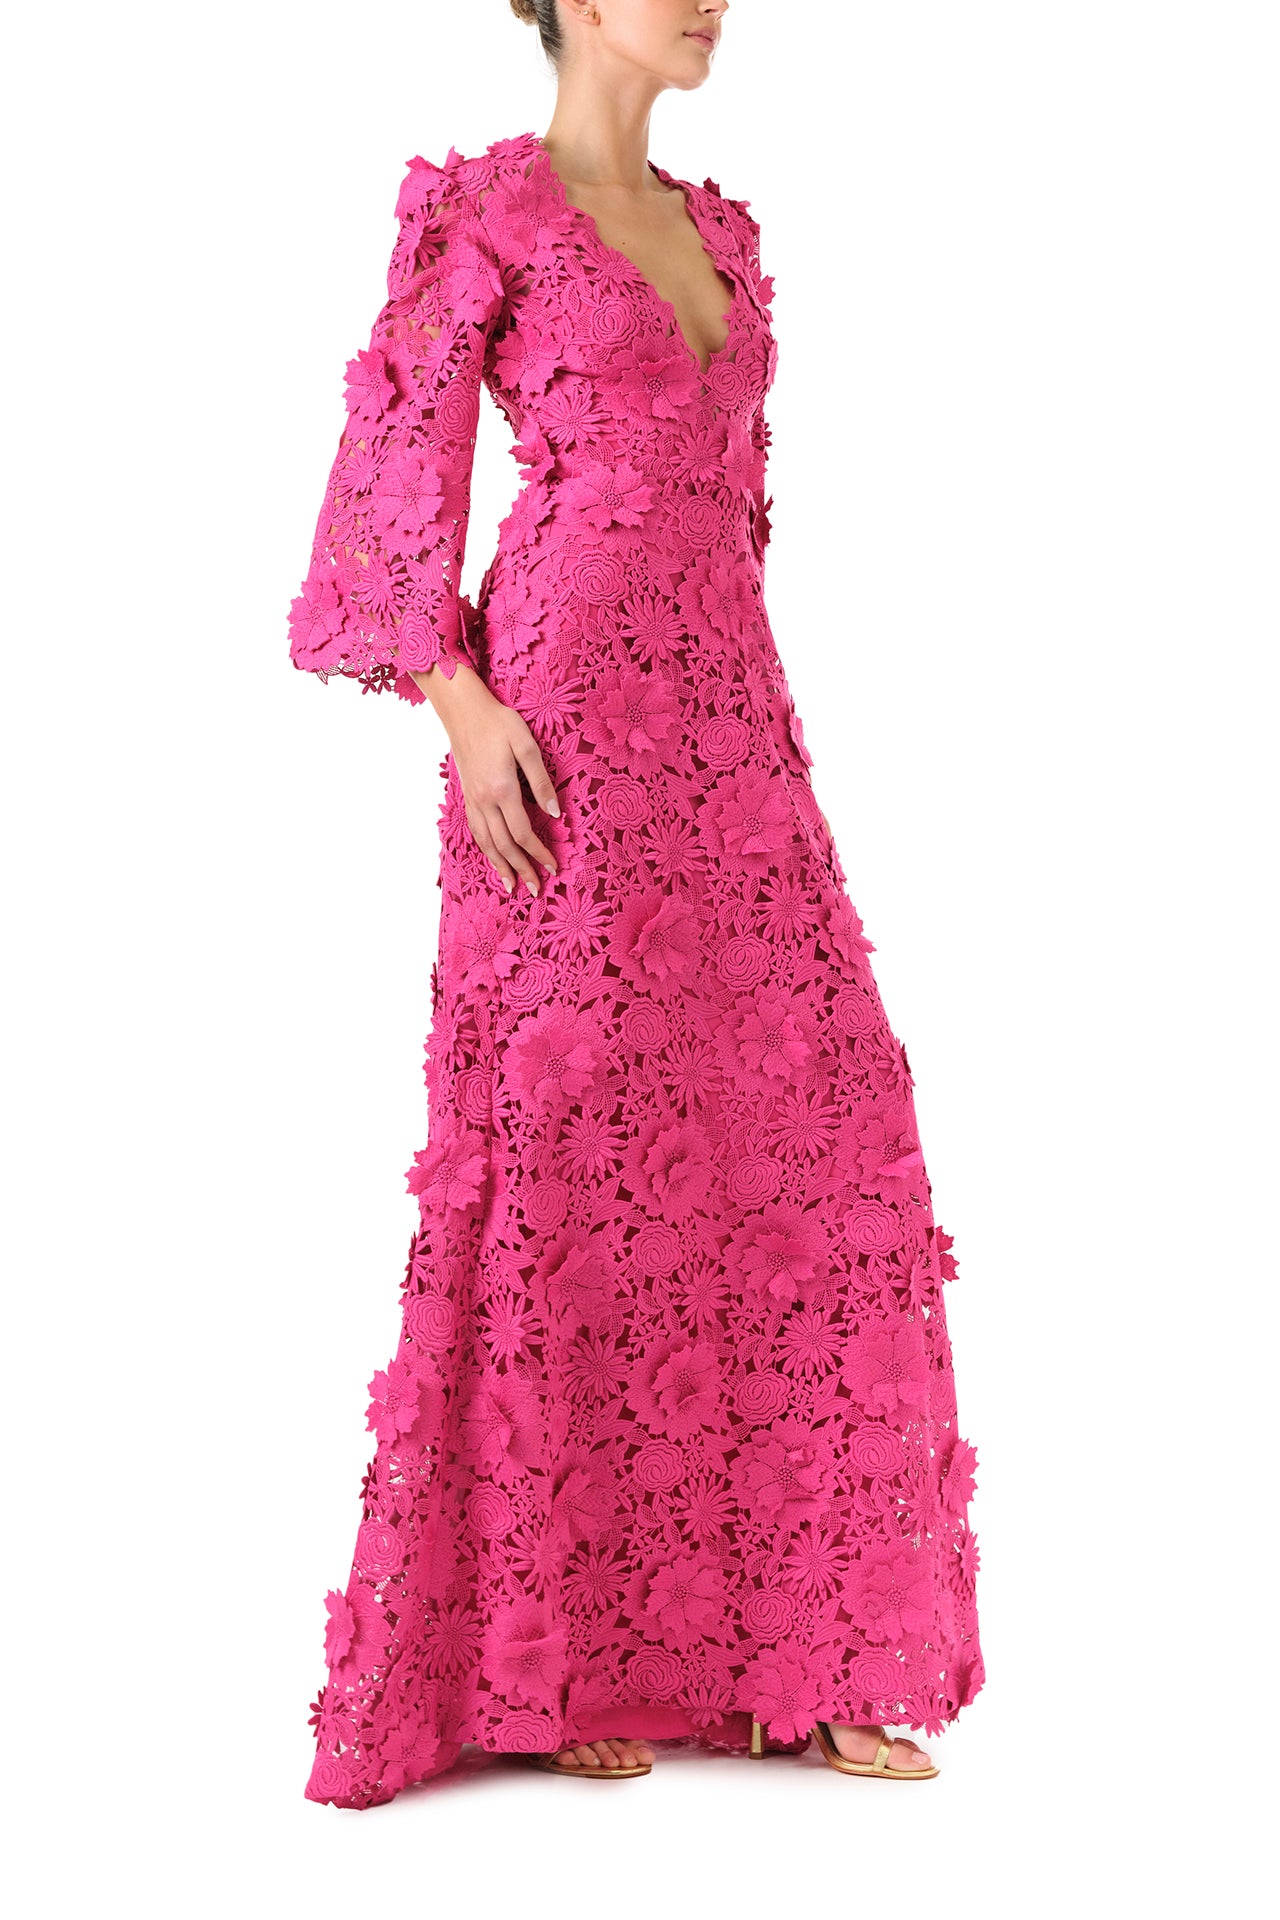 Monique Lhuillier Fall 2024 bell sleeve, floor length gown with deep v-neckline in Fuchsia 3D Guipure Lace - right side.